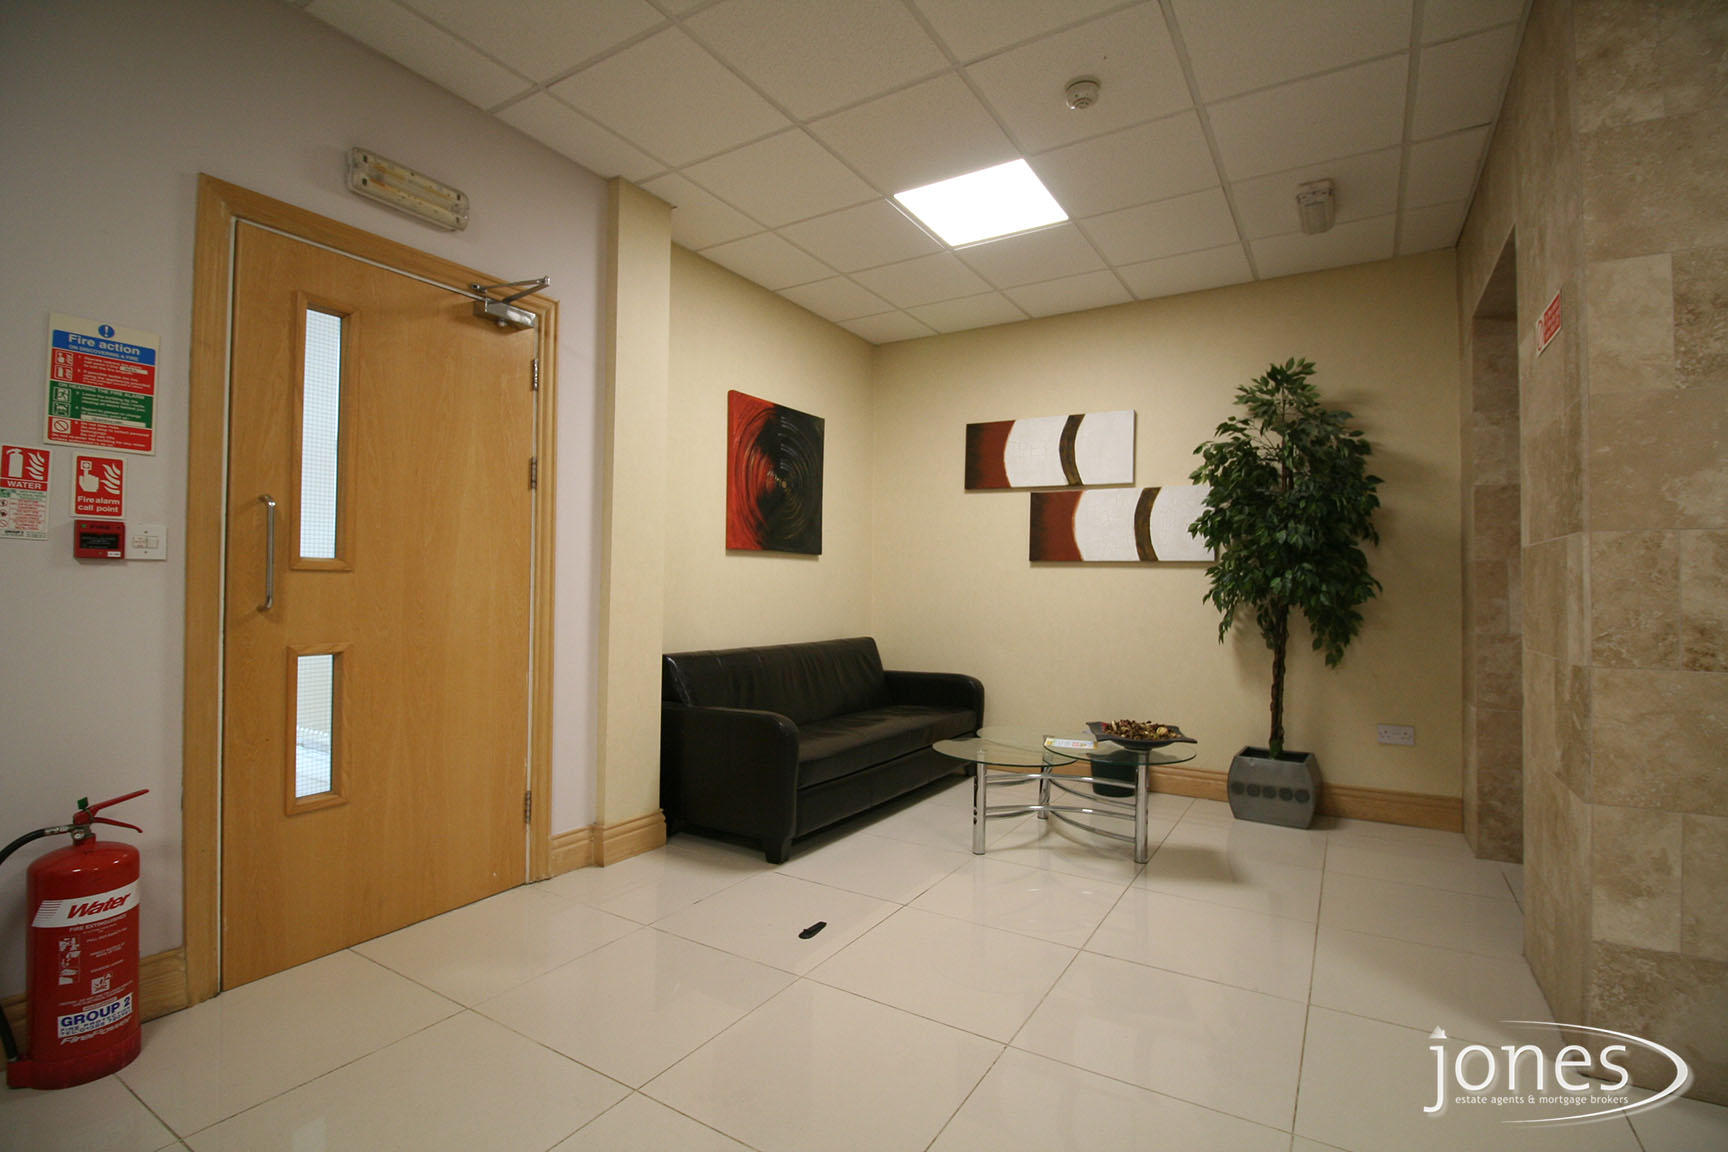 Home for Sale Let - Photo 05 Durham Tees Valley Business Centre, Orde Wingate Way,Stockton on Tees, TS19